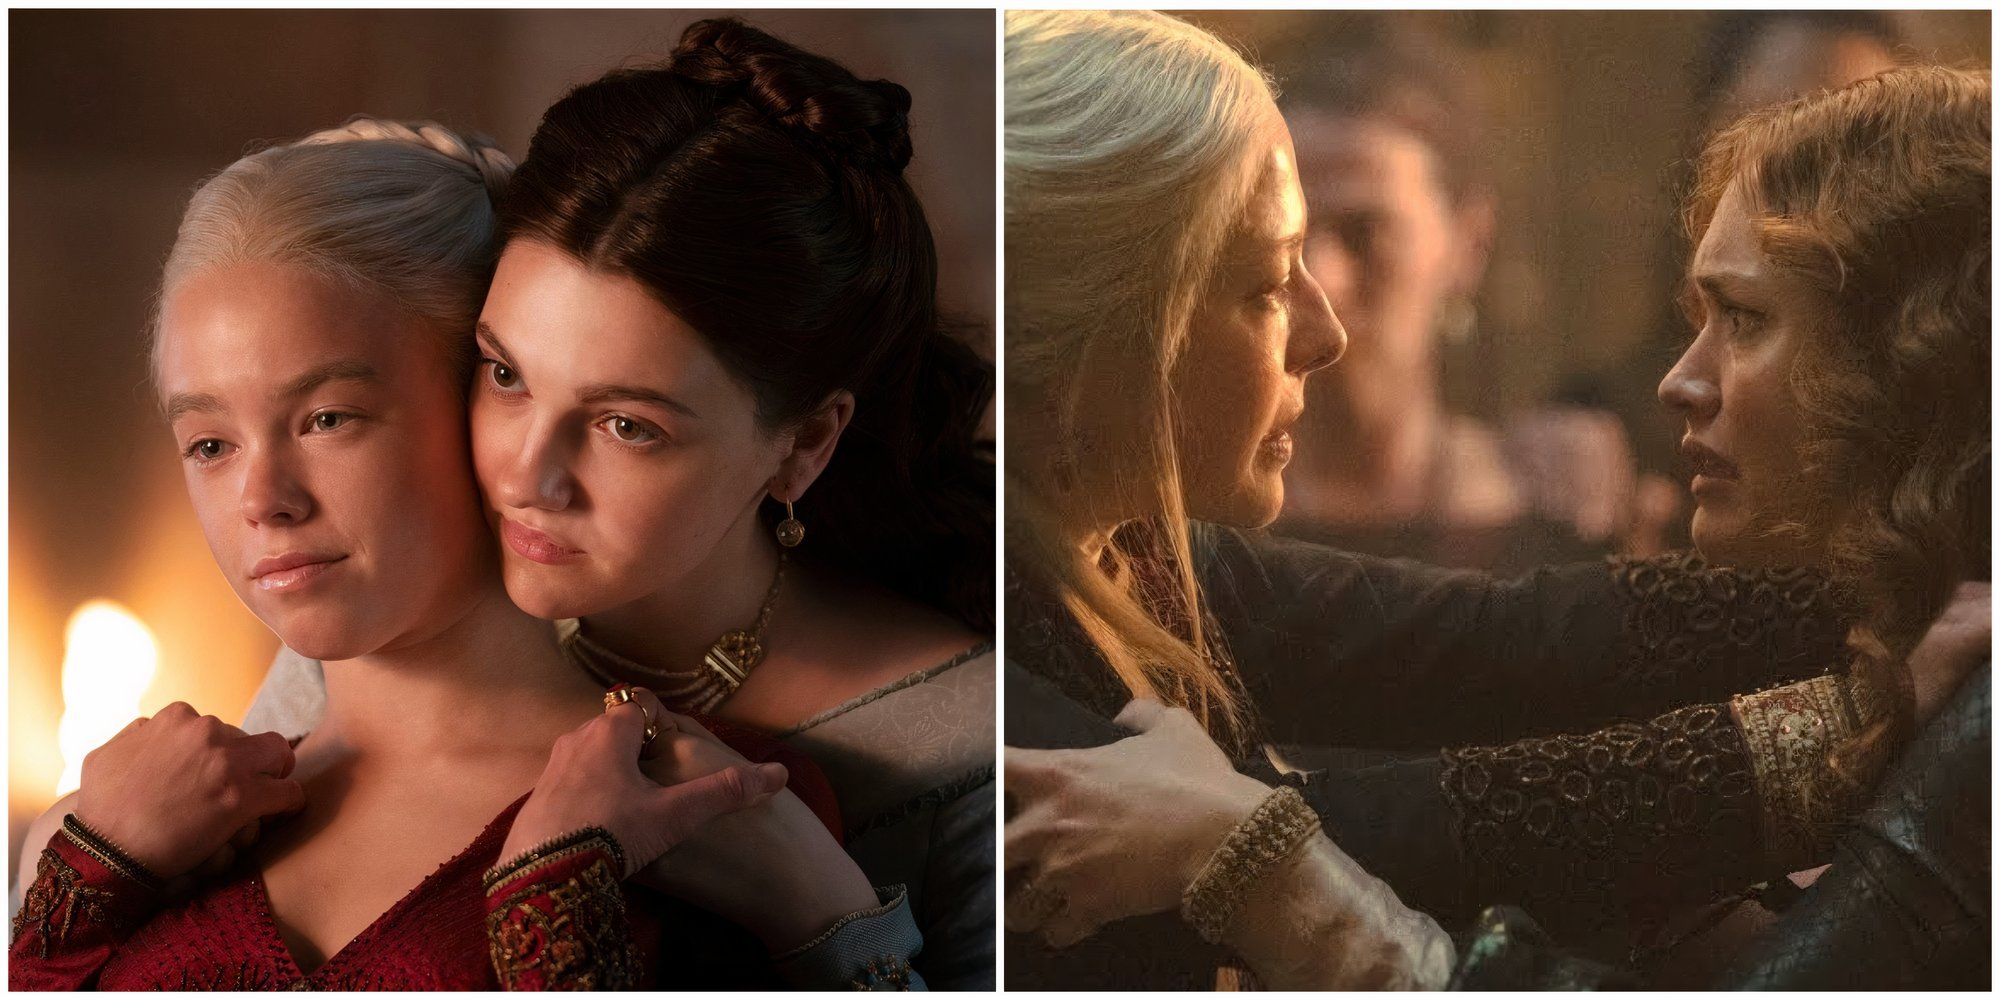 Younger Iterations of Rhaenyra and Alicent vs. older in House of the Dragon.